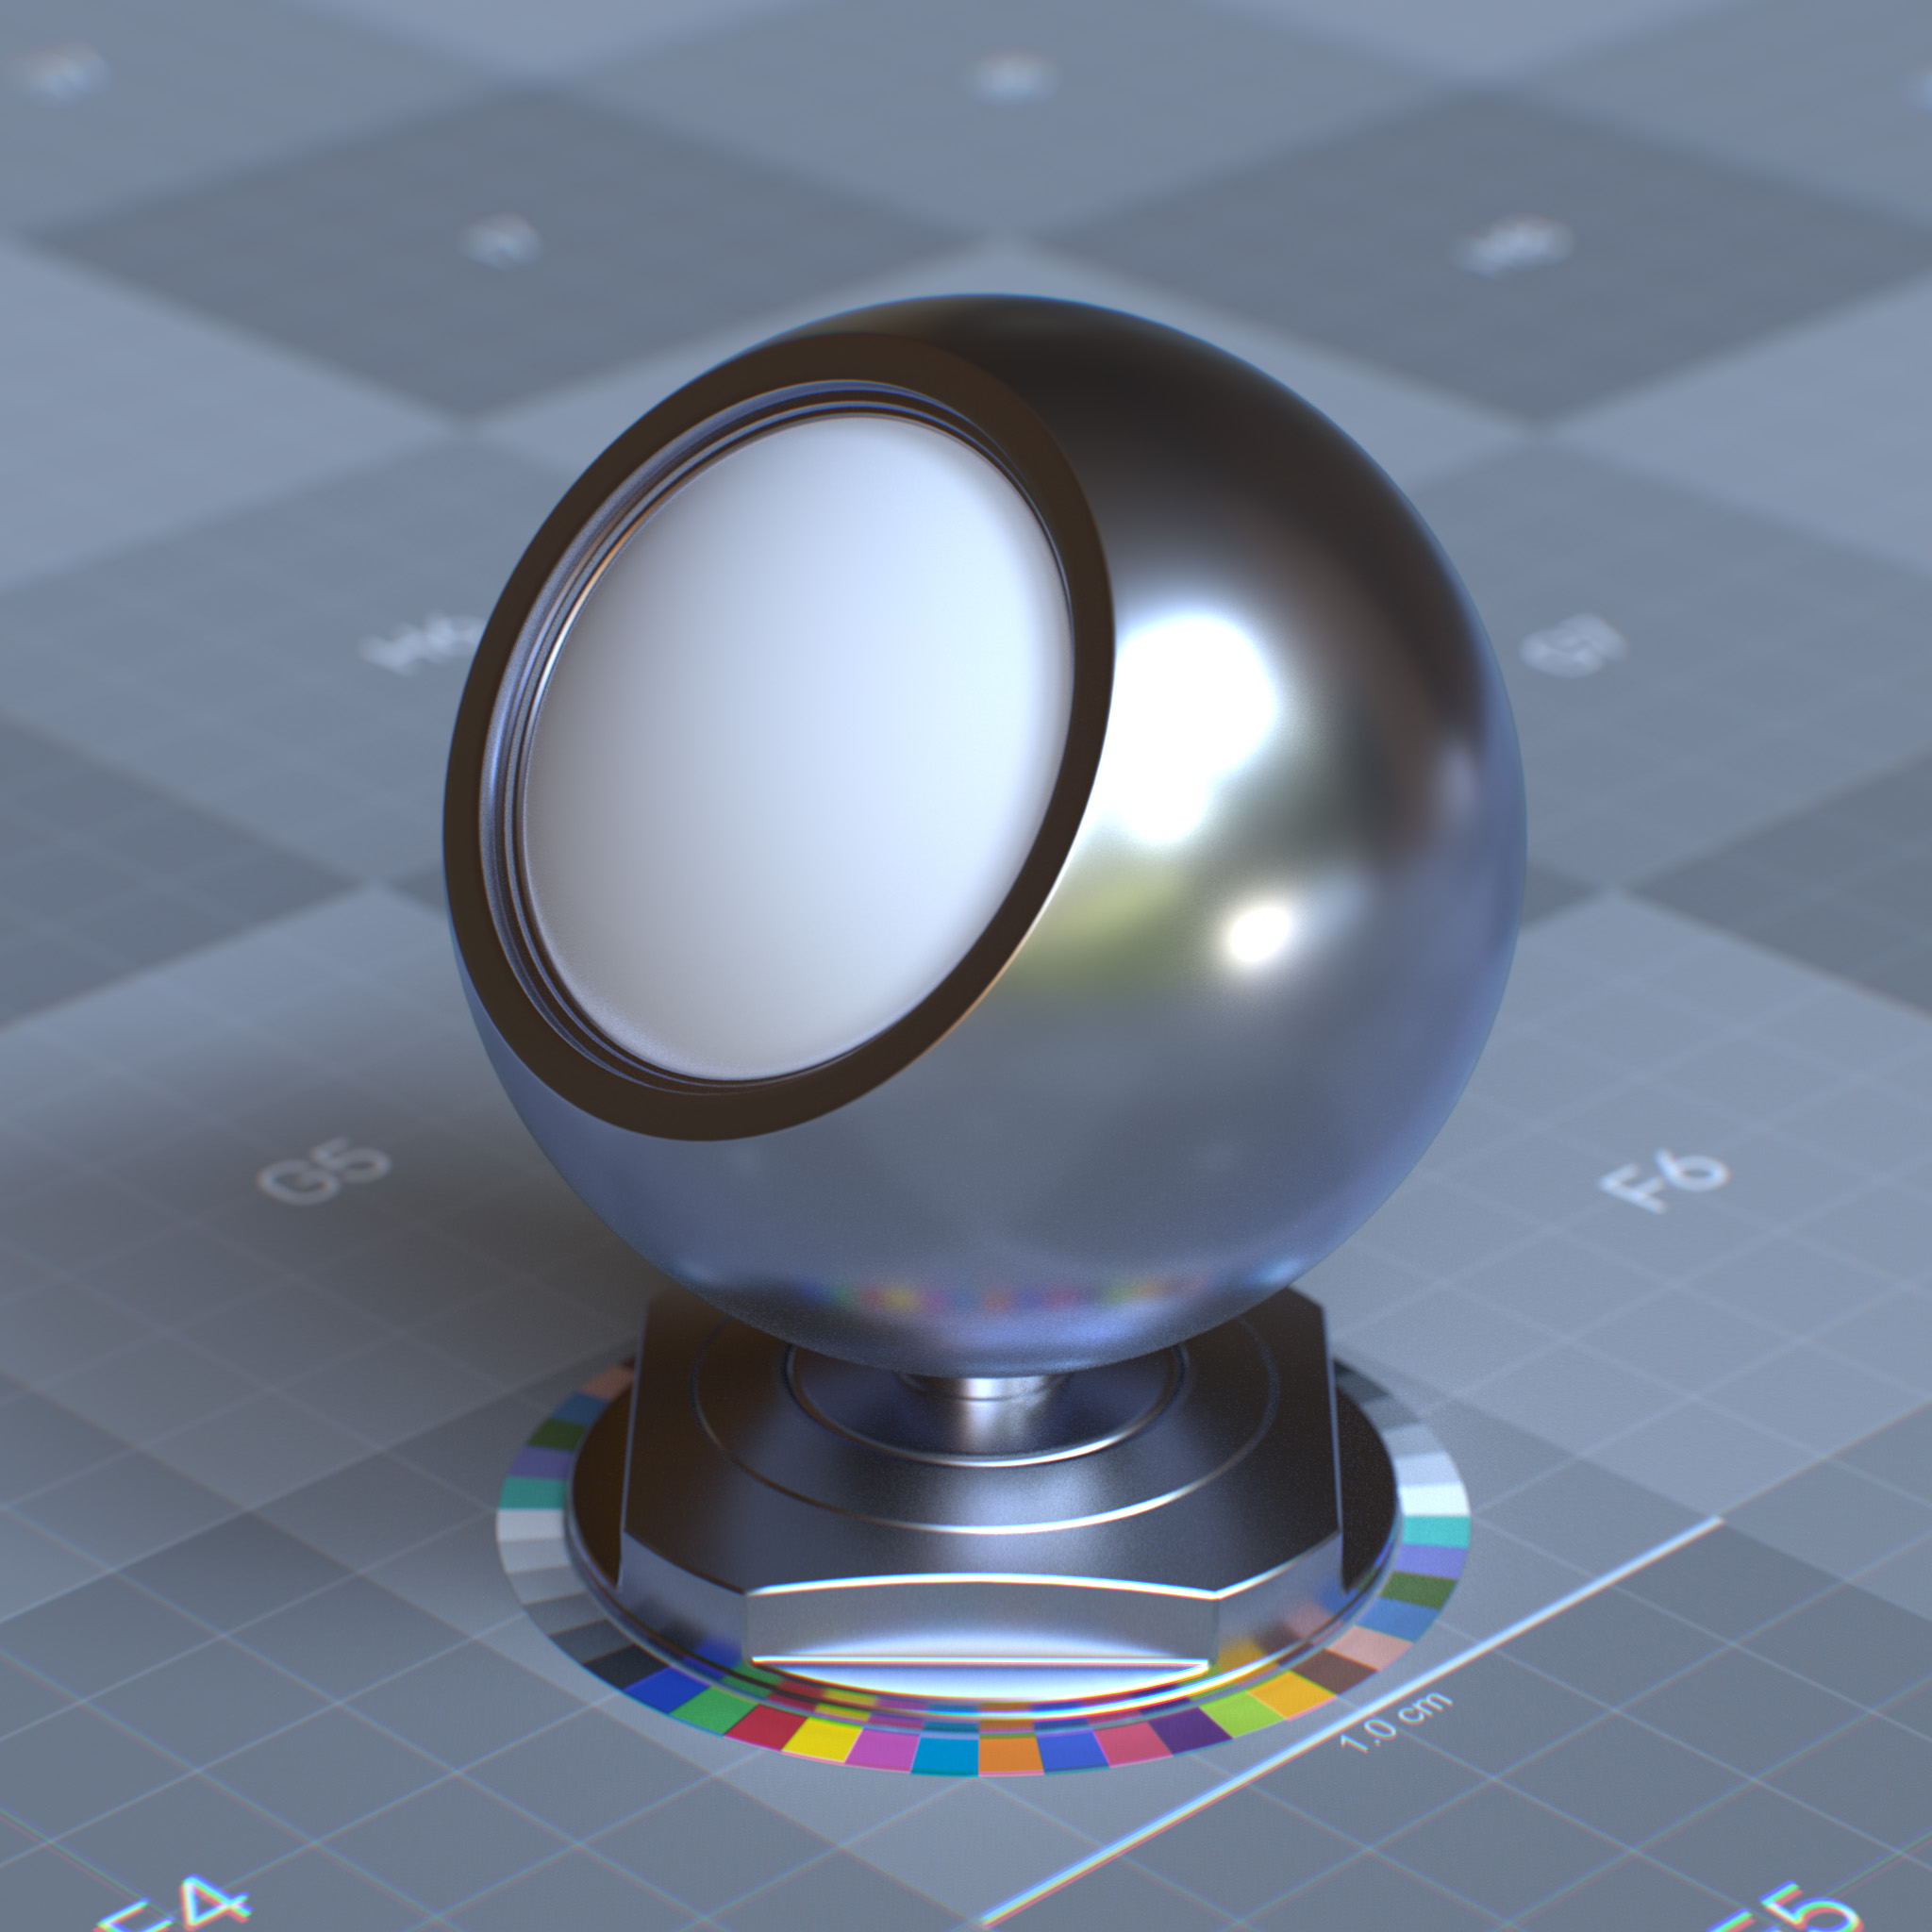 rtx_material_omnisurfacebase_specular_reflection_color_0p0_0p7_1p0_metalness